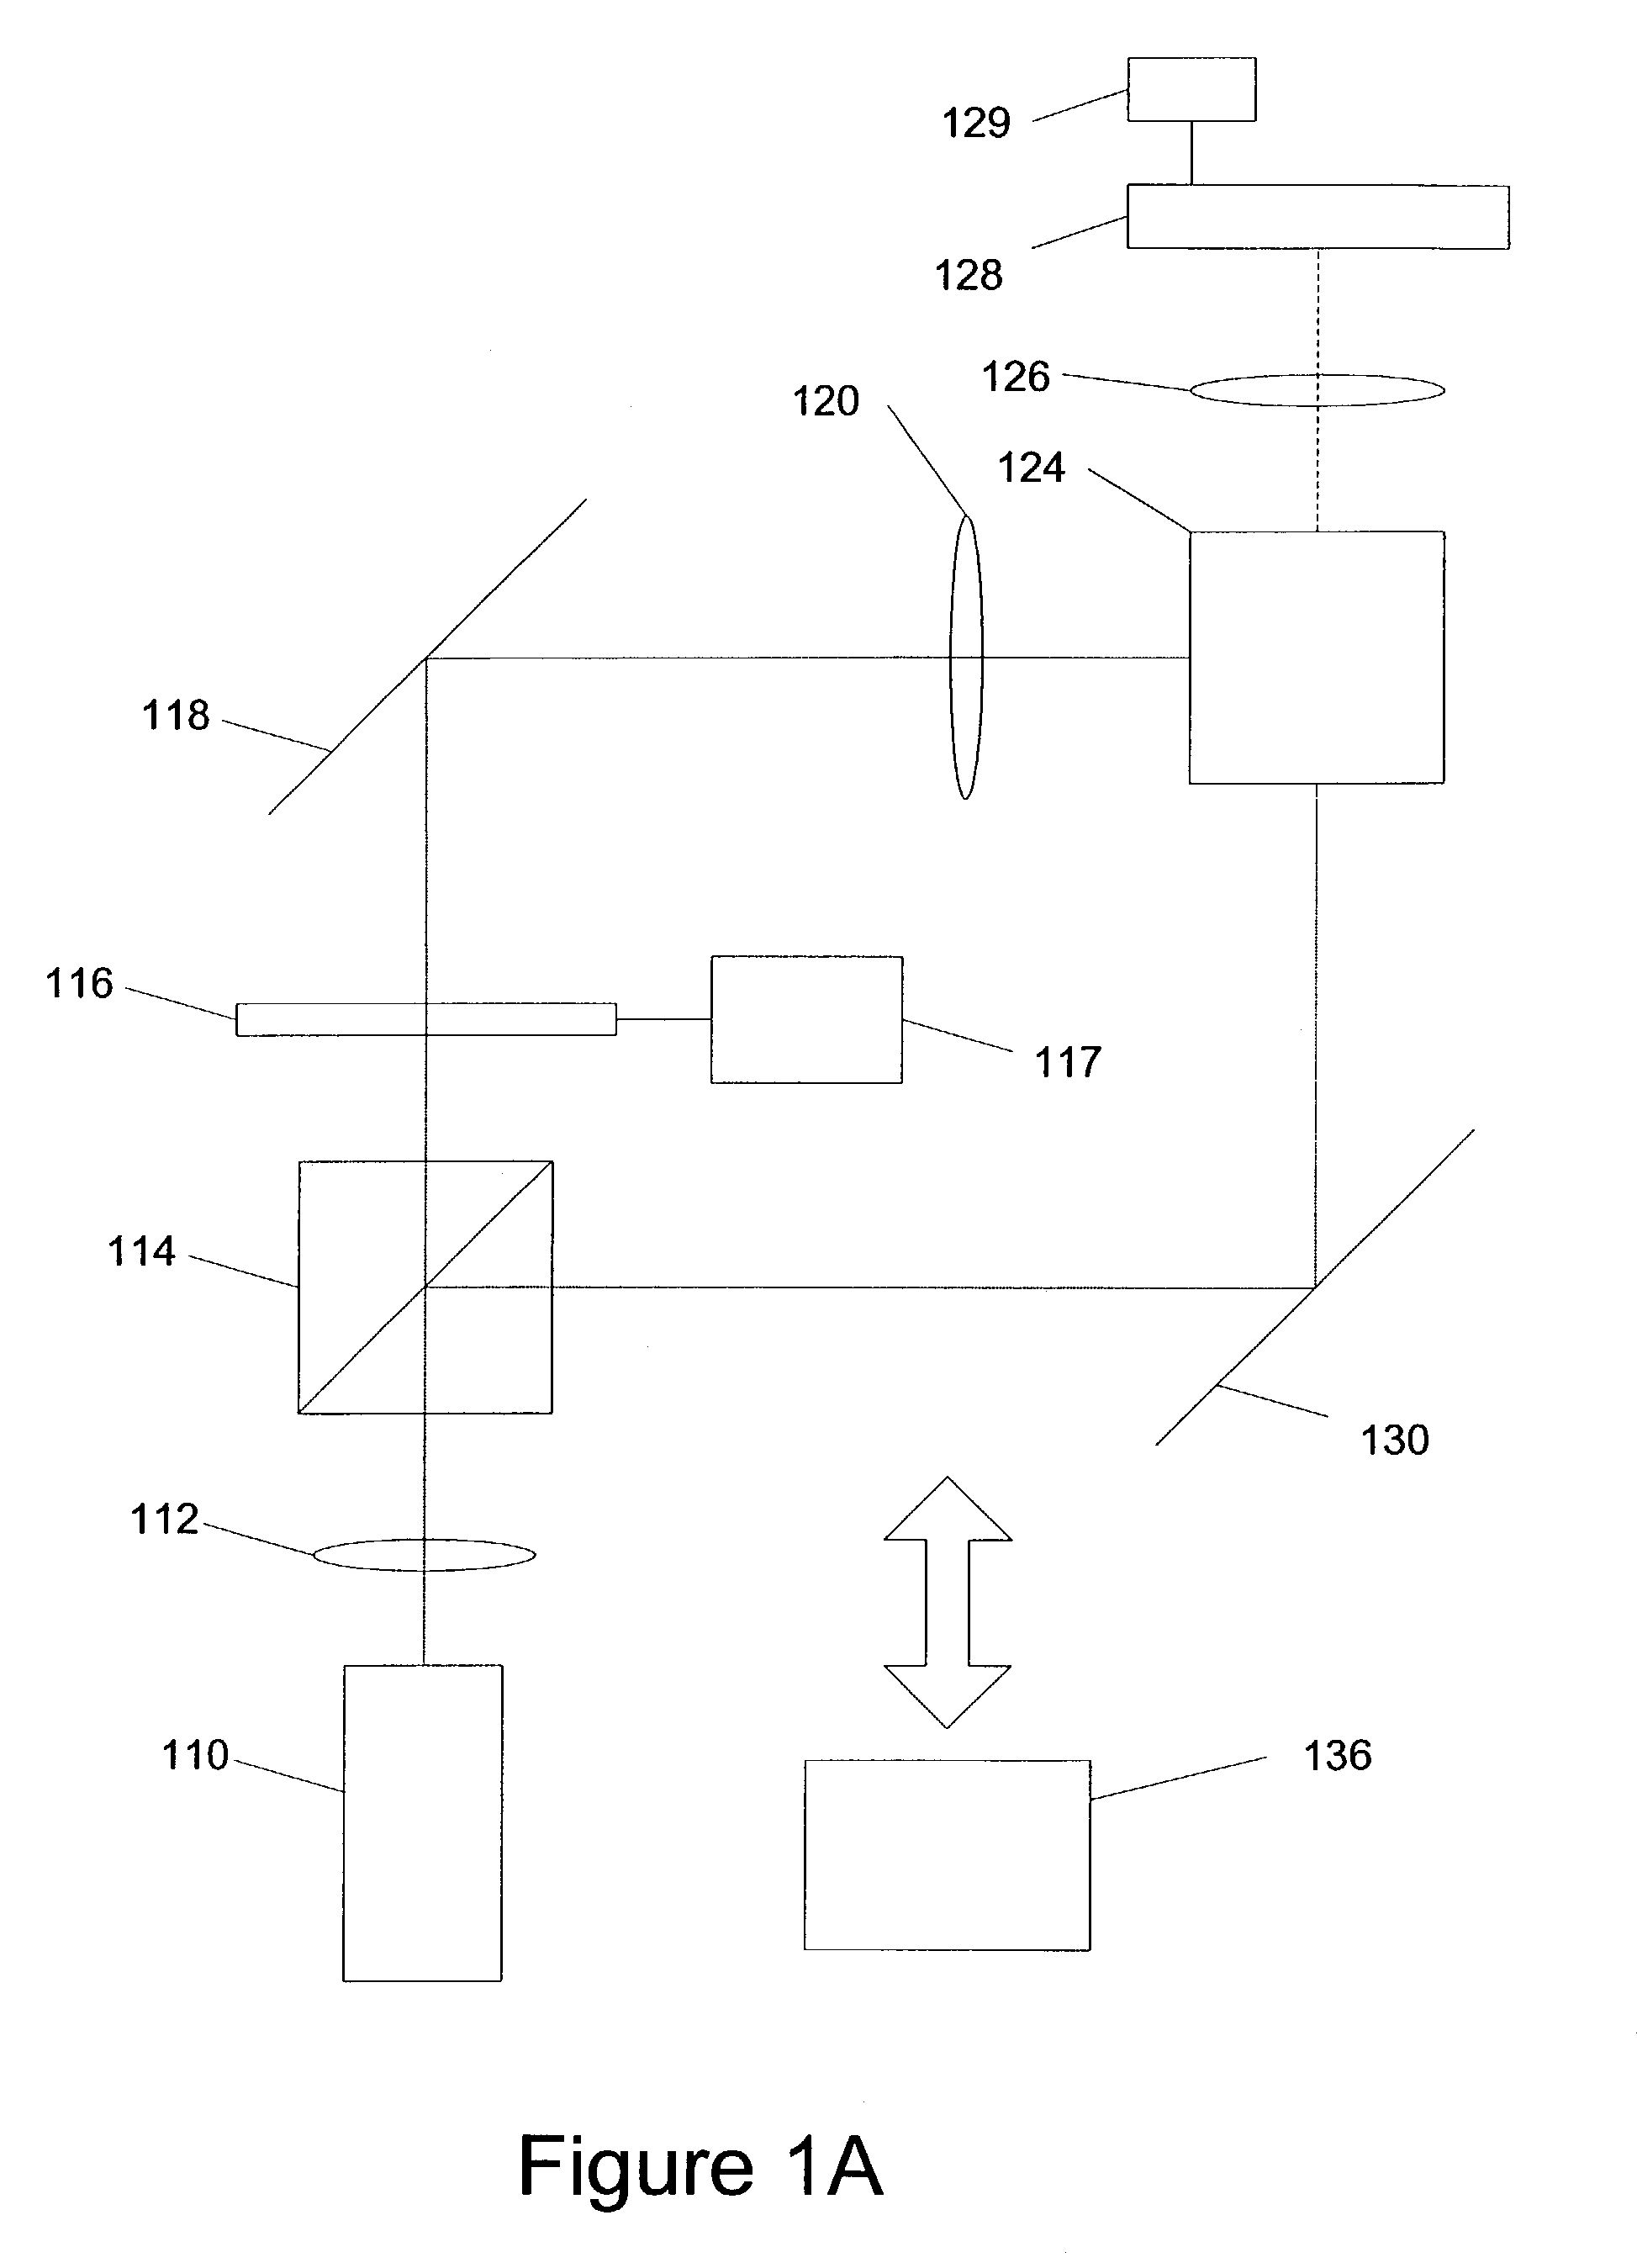 Micro-positioning movement of holographic data storage system components